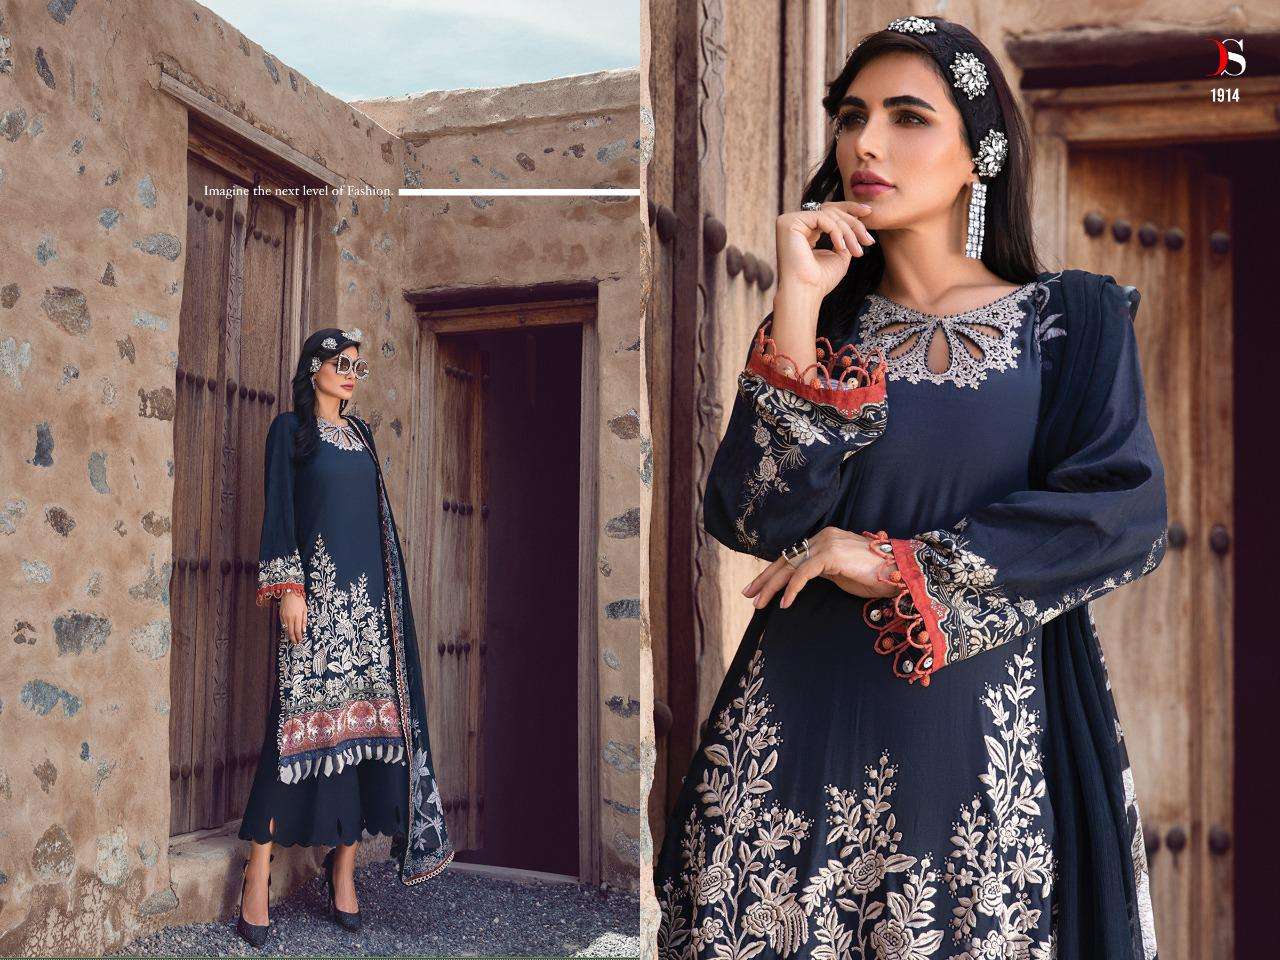 mariab mprint 22-5 by deepsy suits pure cotton self embroidered salwar suits collection surat